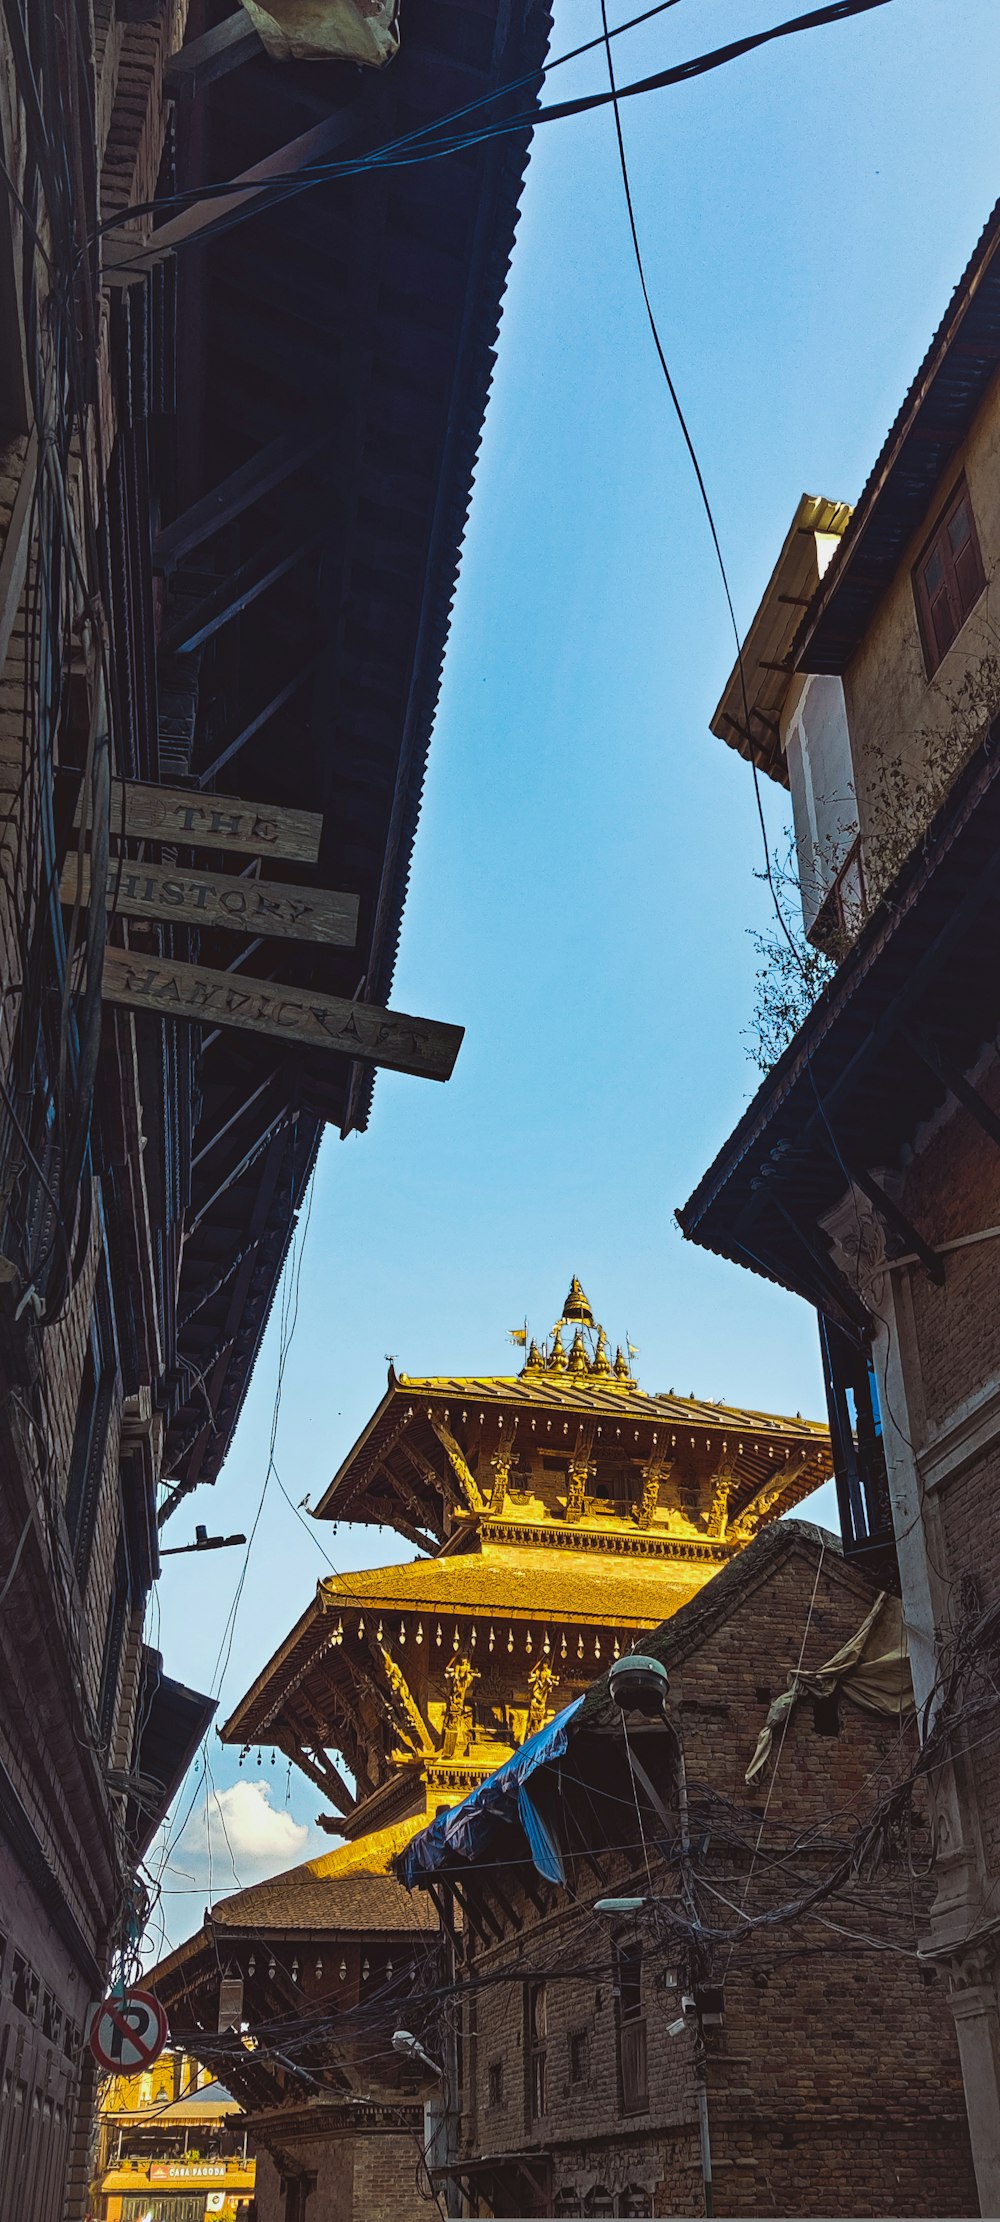 a narrow street with a yellow building in the background